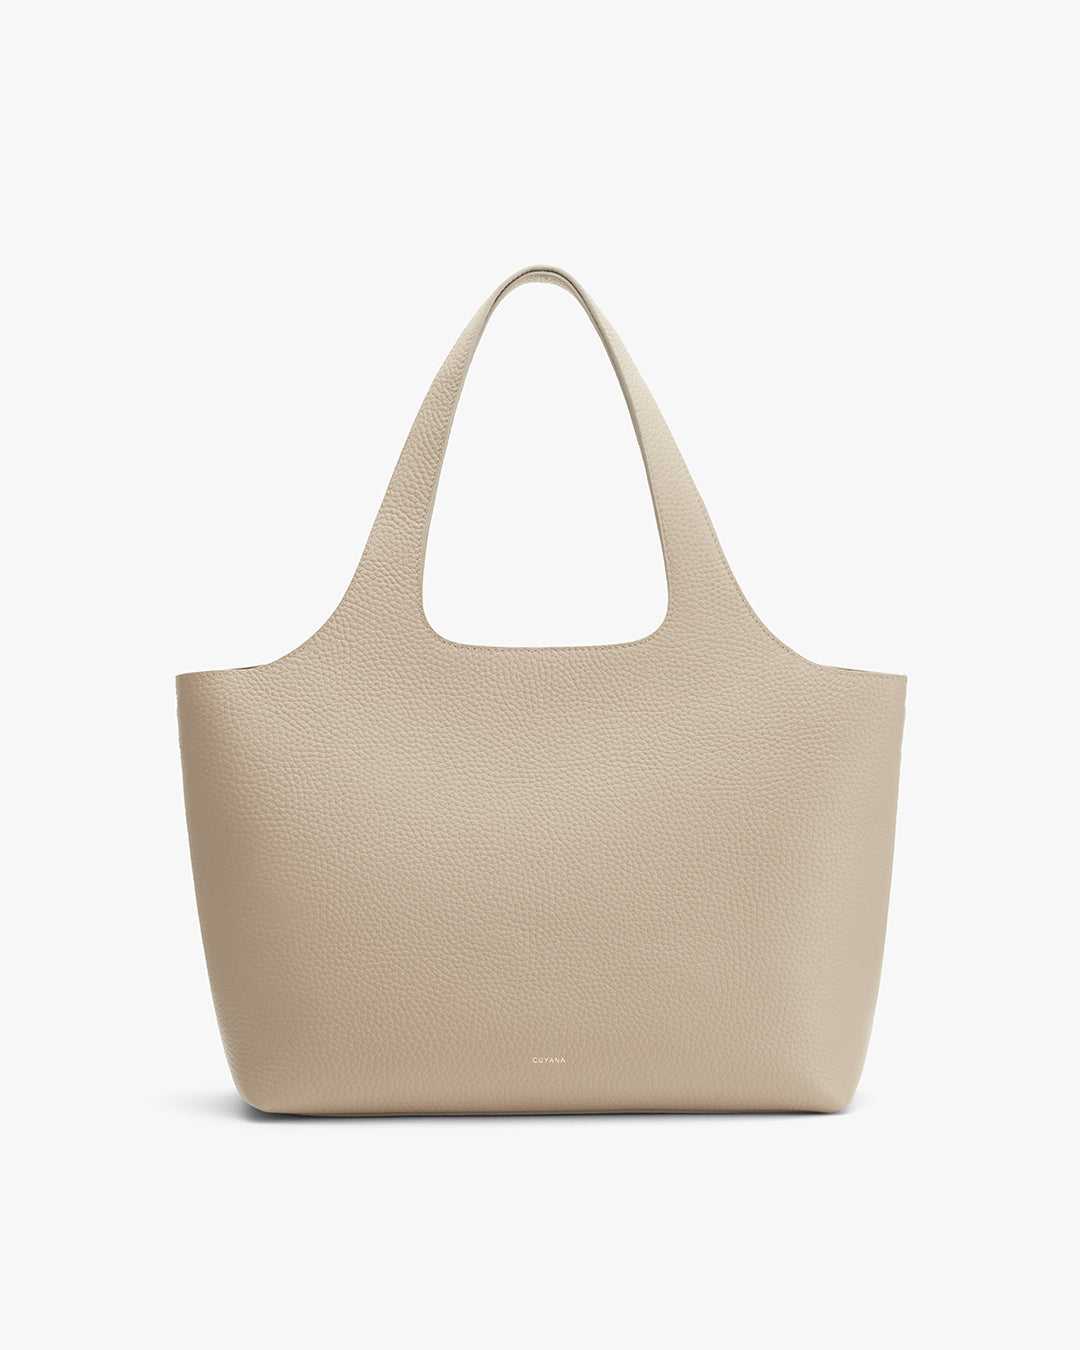 Cuyana The System Tote